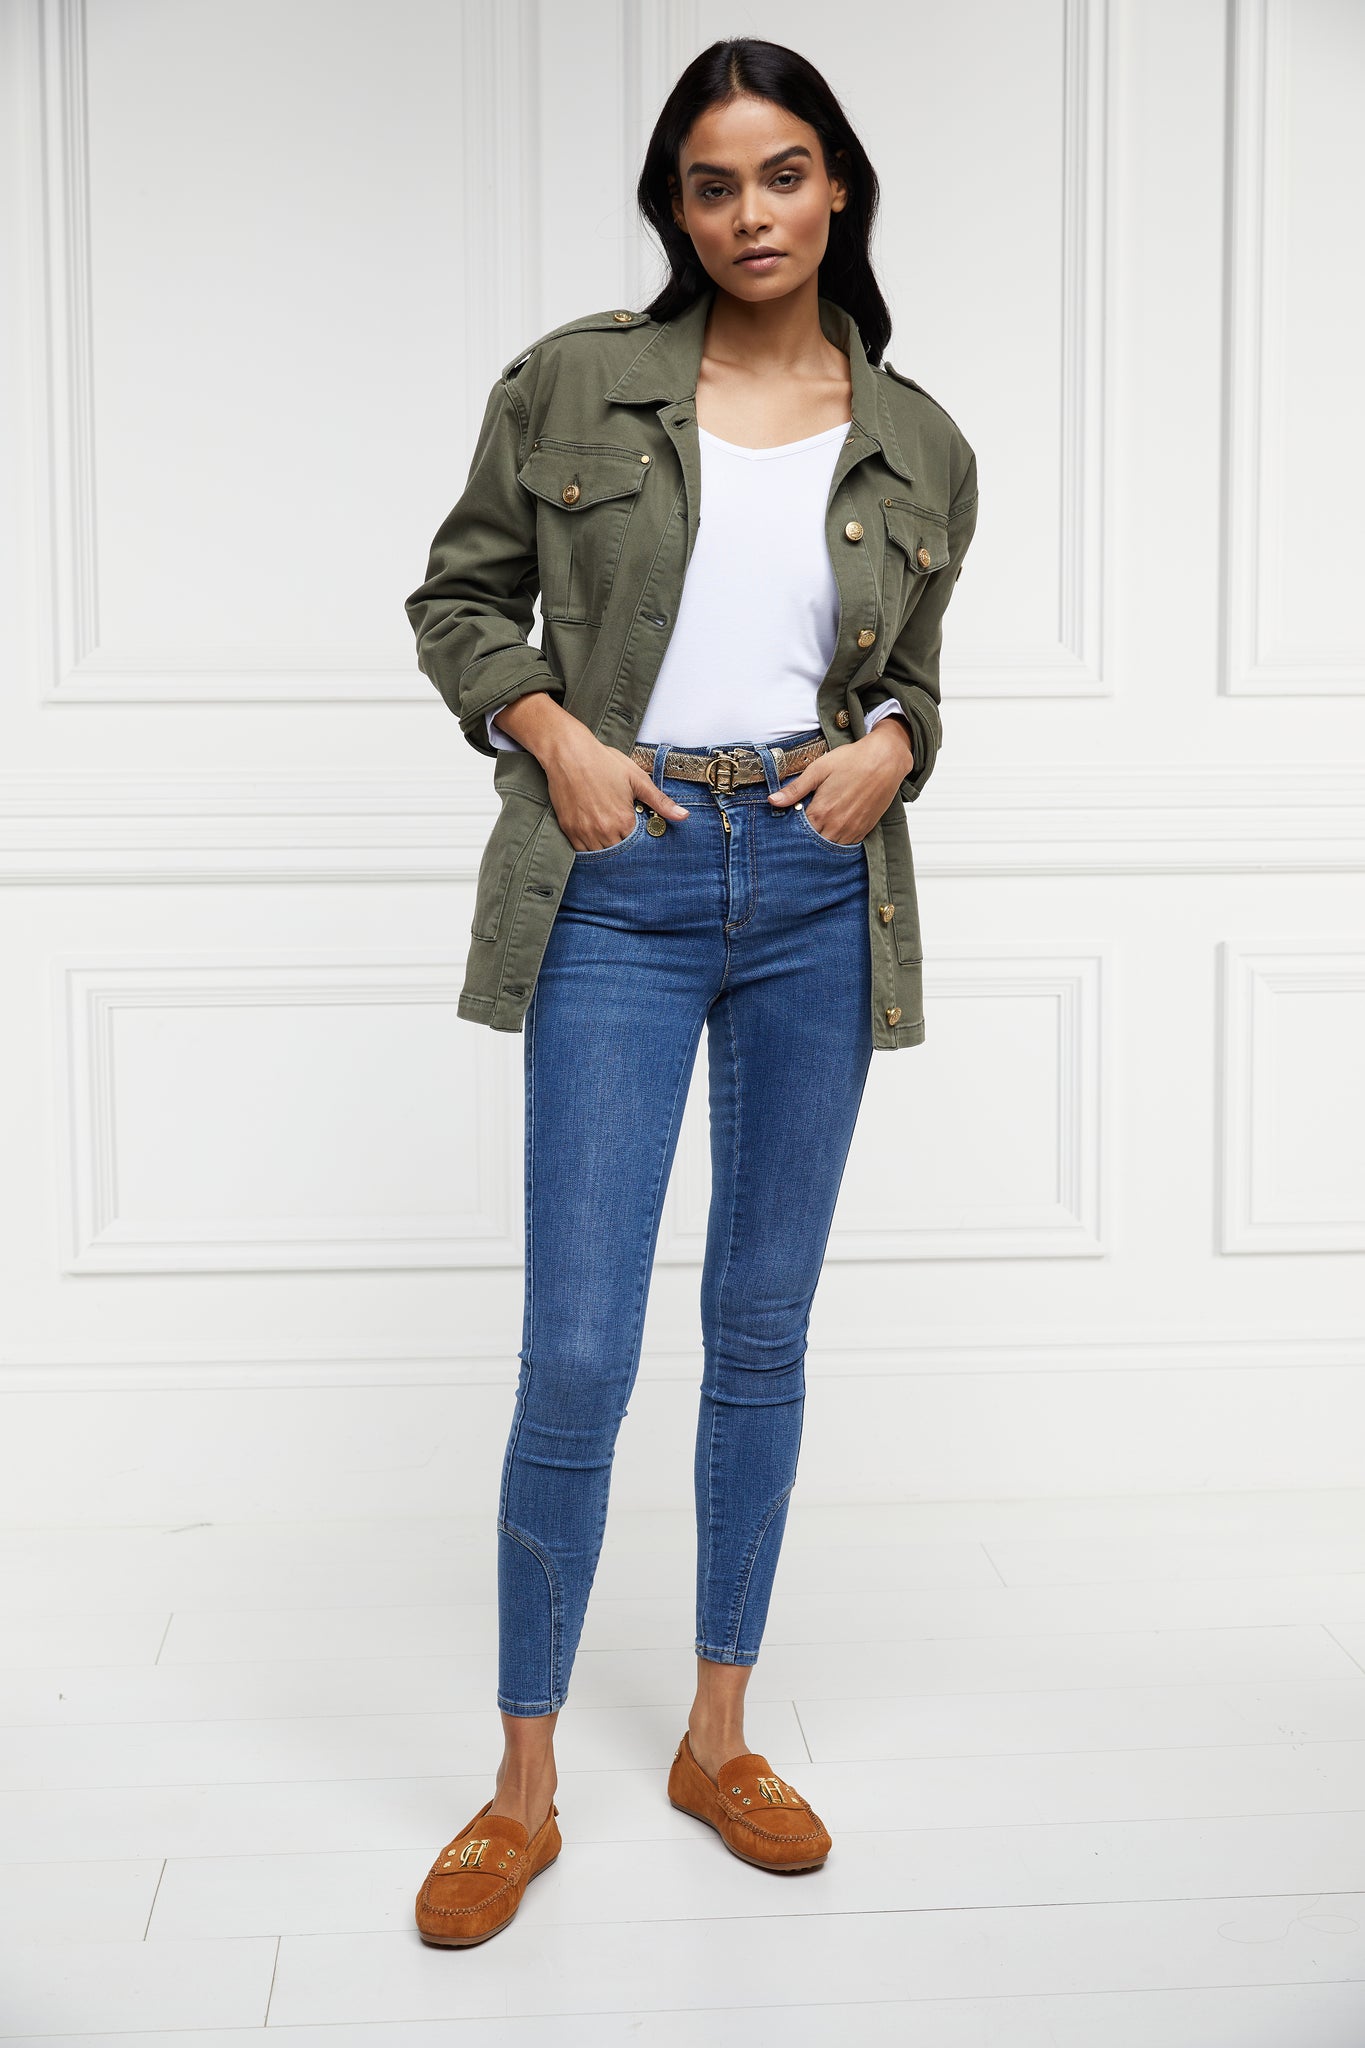 Relaxed fit collared artillery style jacket in khaki with four pockets two chest ones being box pleated  and two hip being patch pockets with gold jean button fastenings adjustable long sleeves and epaulette shoulder detail worn with white tee classic indigo skinny jeans and tan suede loafers 